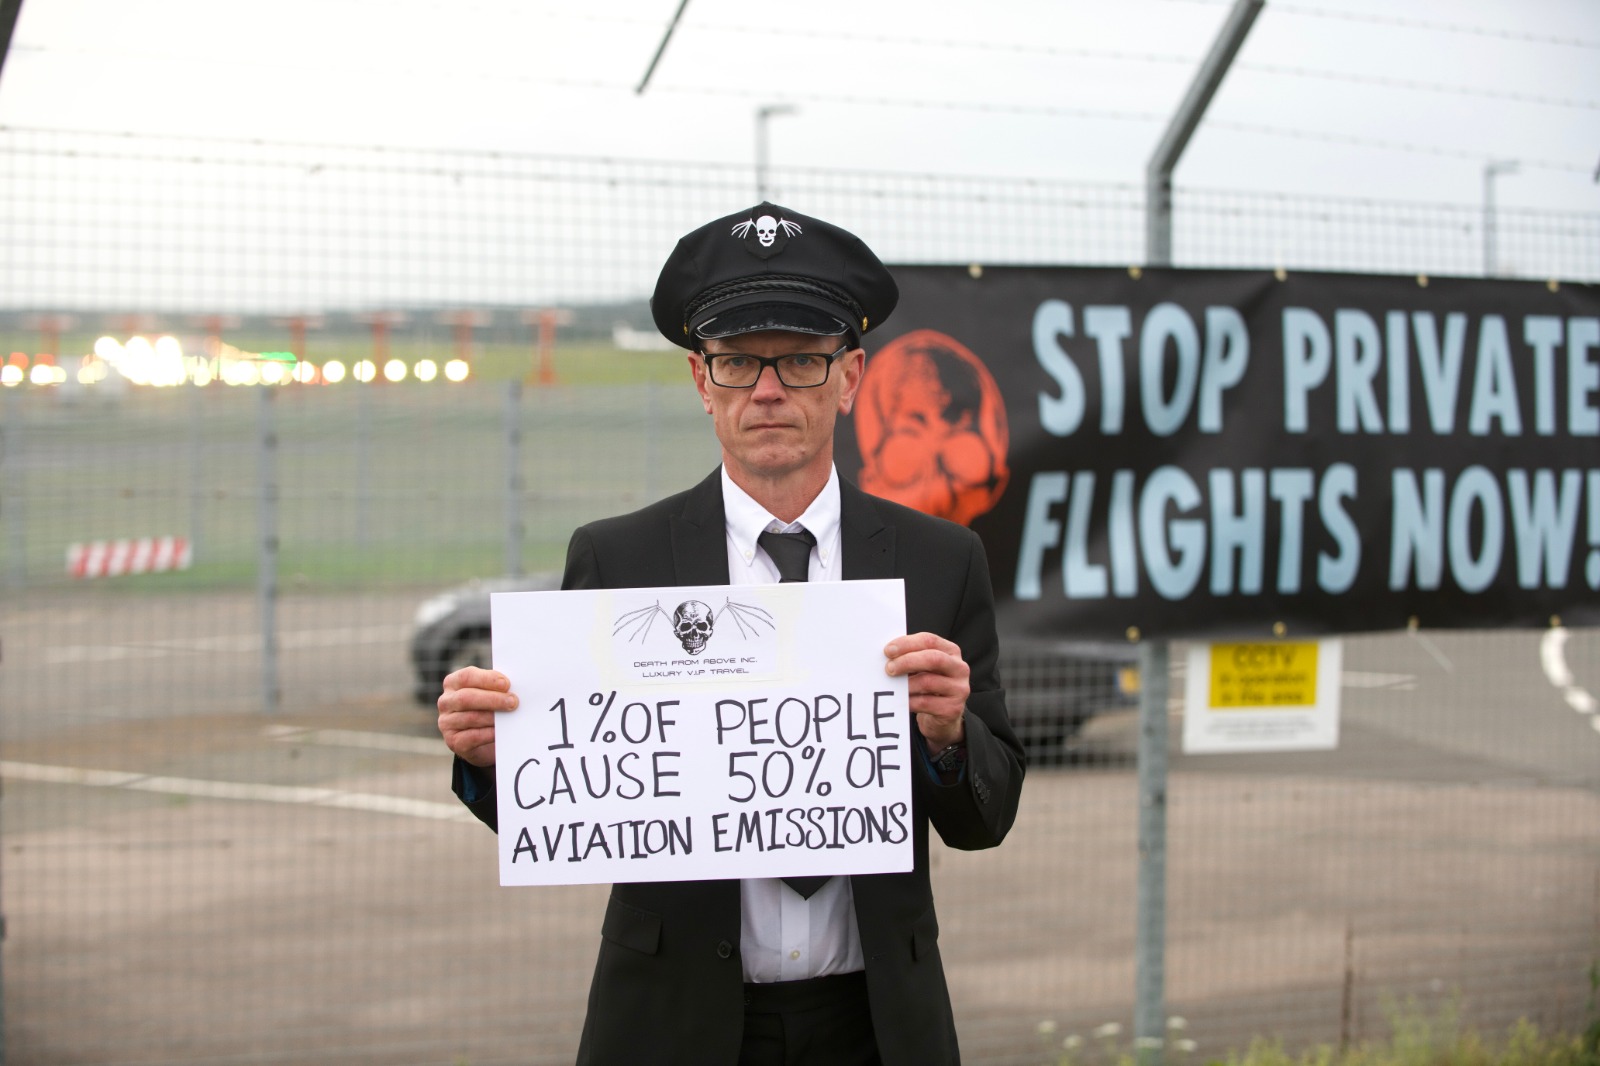 A rebel dressed as a chauffeur holds a sign that says 1% of people cause 50% of aviation emissions.